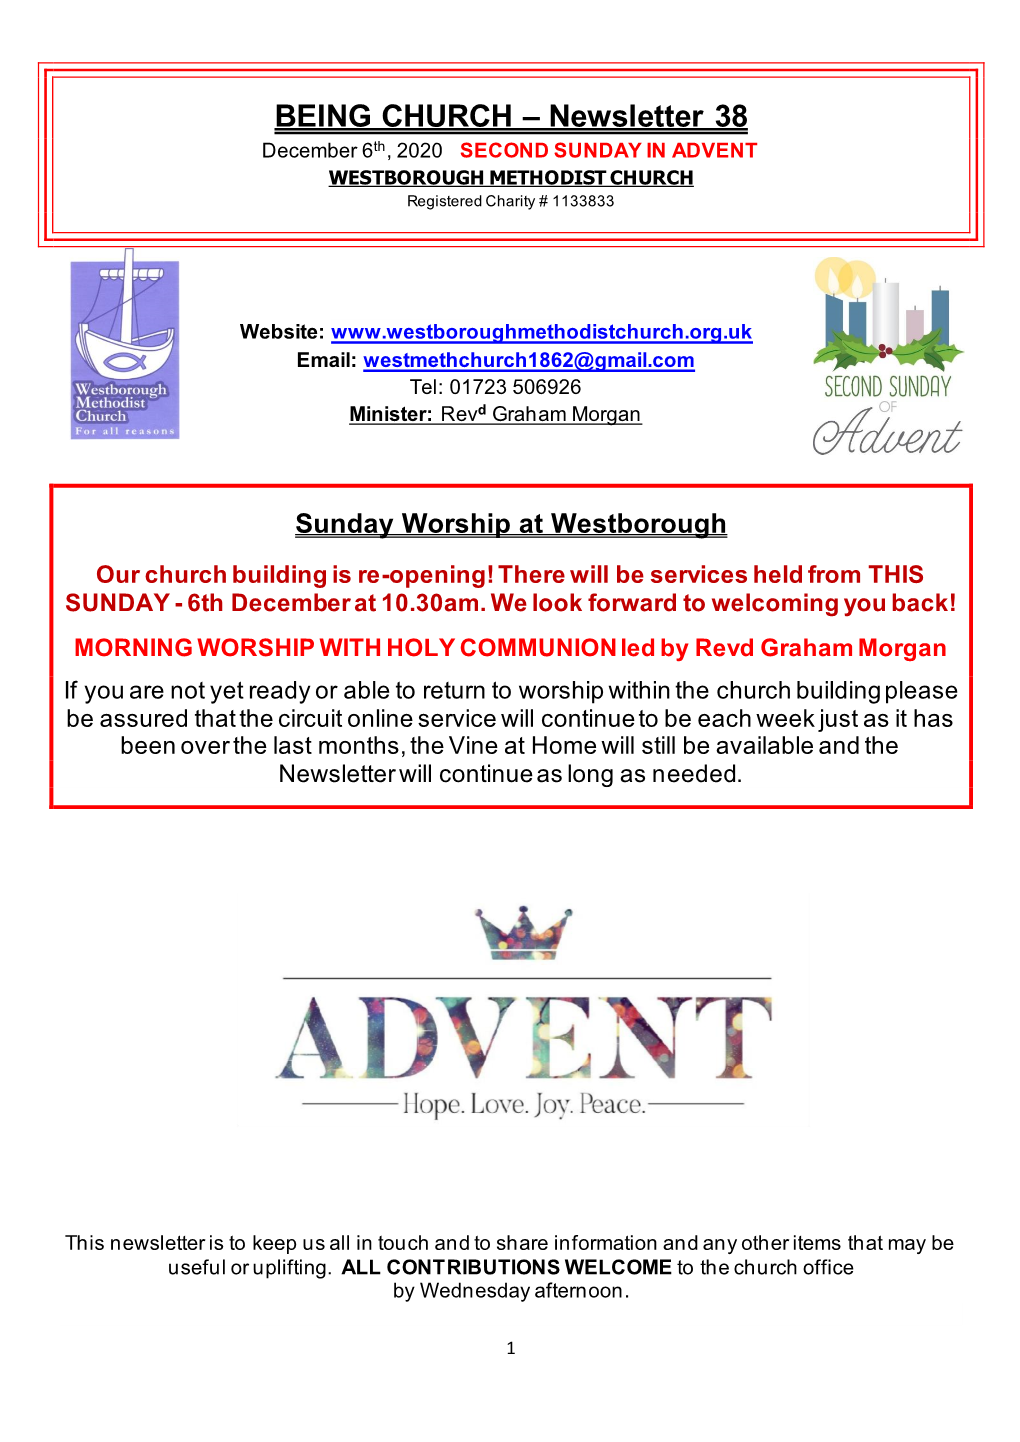 BEING CHURCH – Newsletter 38 December 6Th, 2020 SECOND SUNDAY in ADVENT WESTBOROUGH METHODIST CHURCH Registered Charity # 1133833